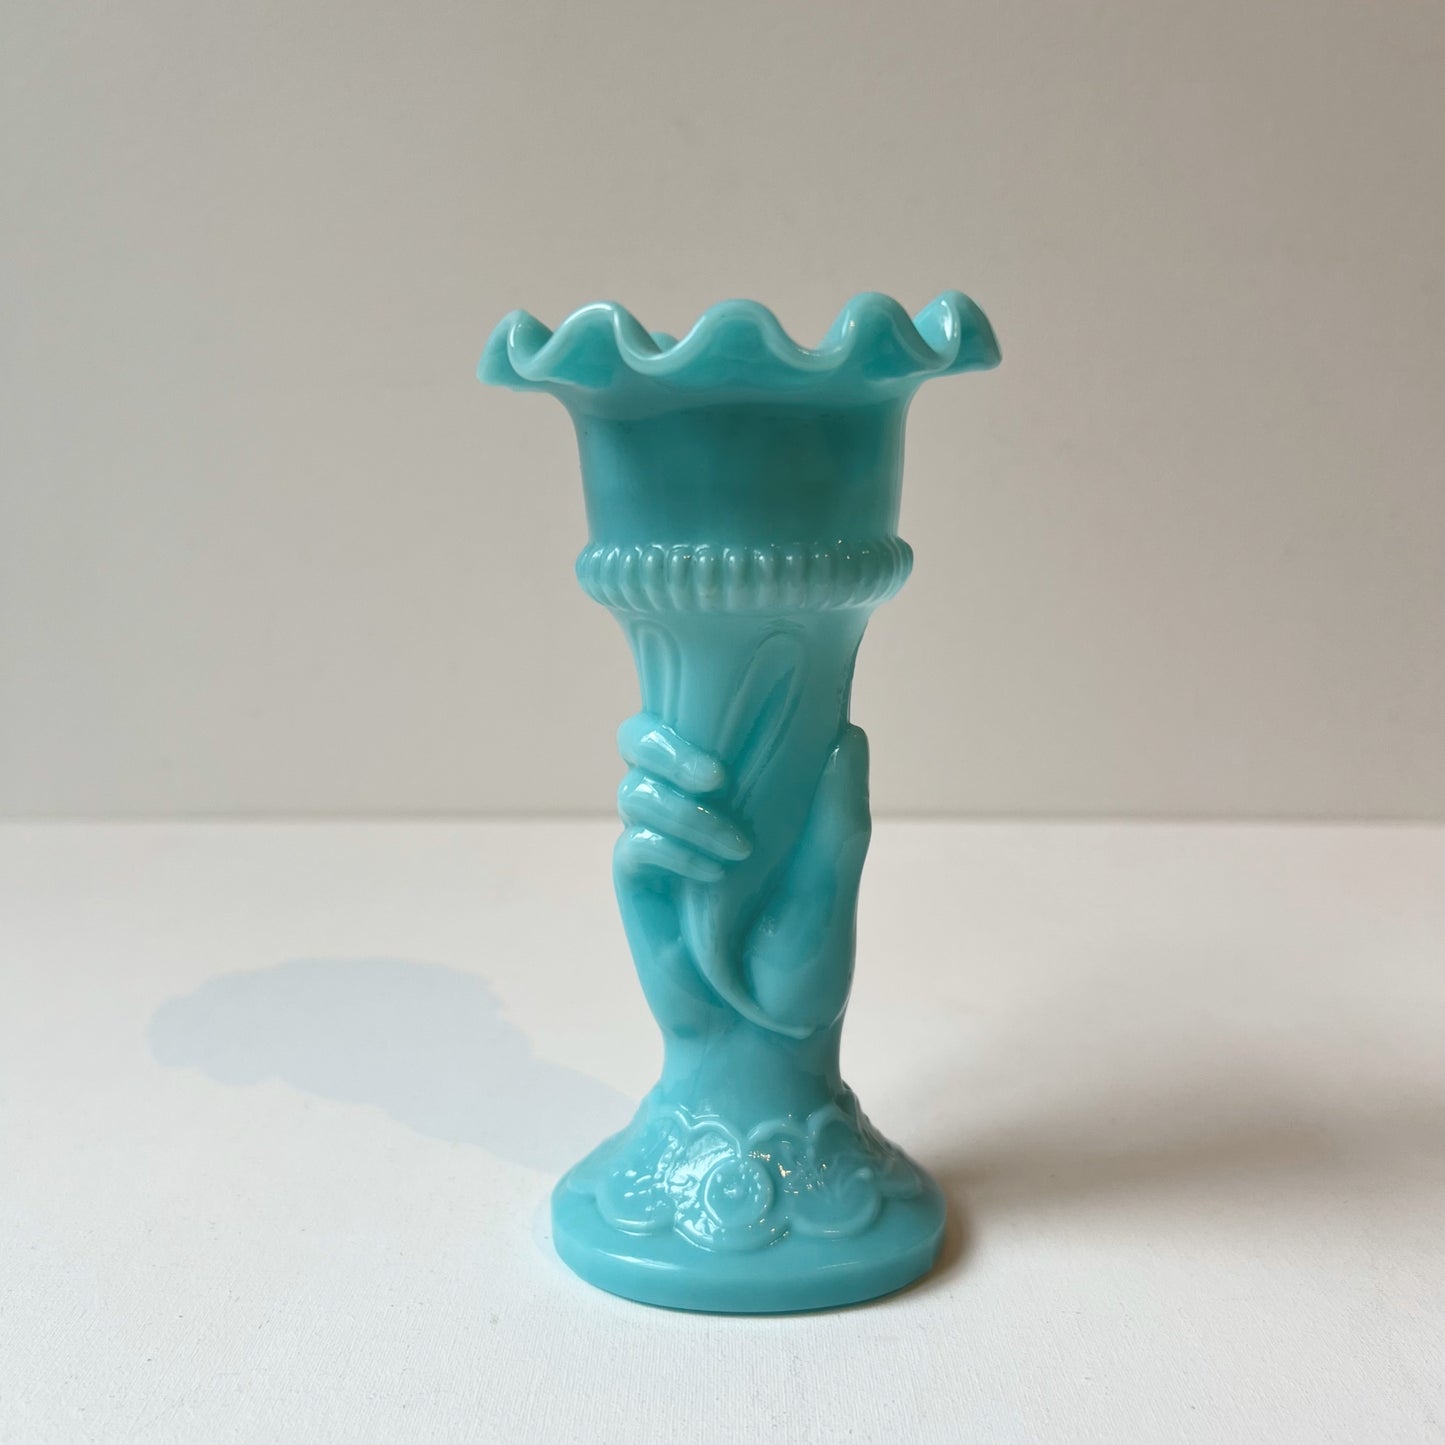 【Antique】France - Portieux 1900s Blue Milk Glass Small Hand Vase